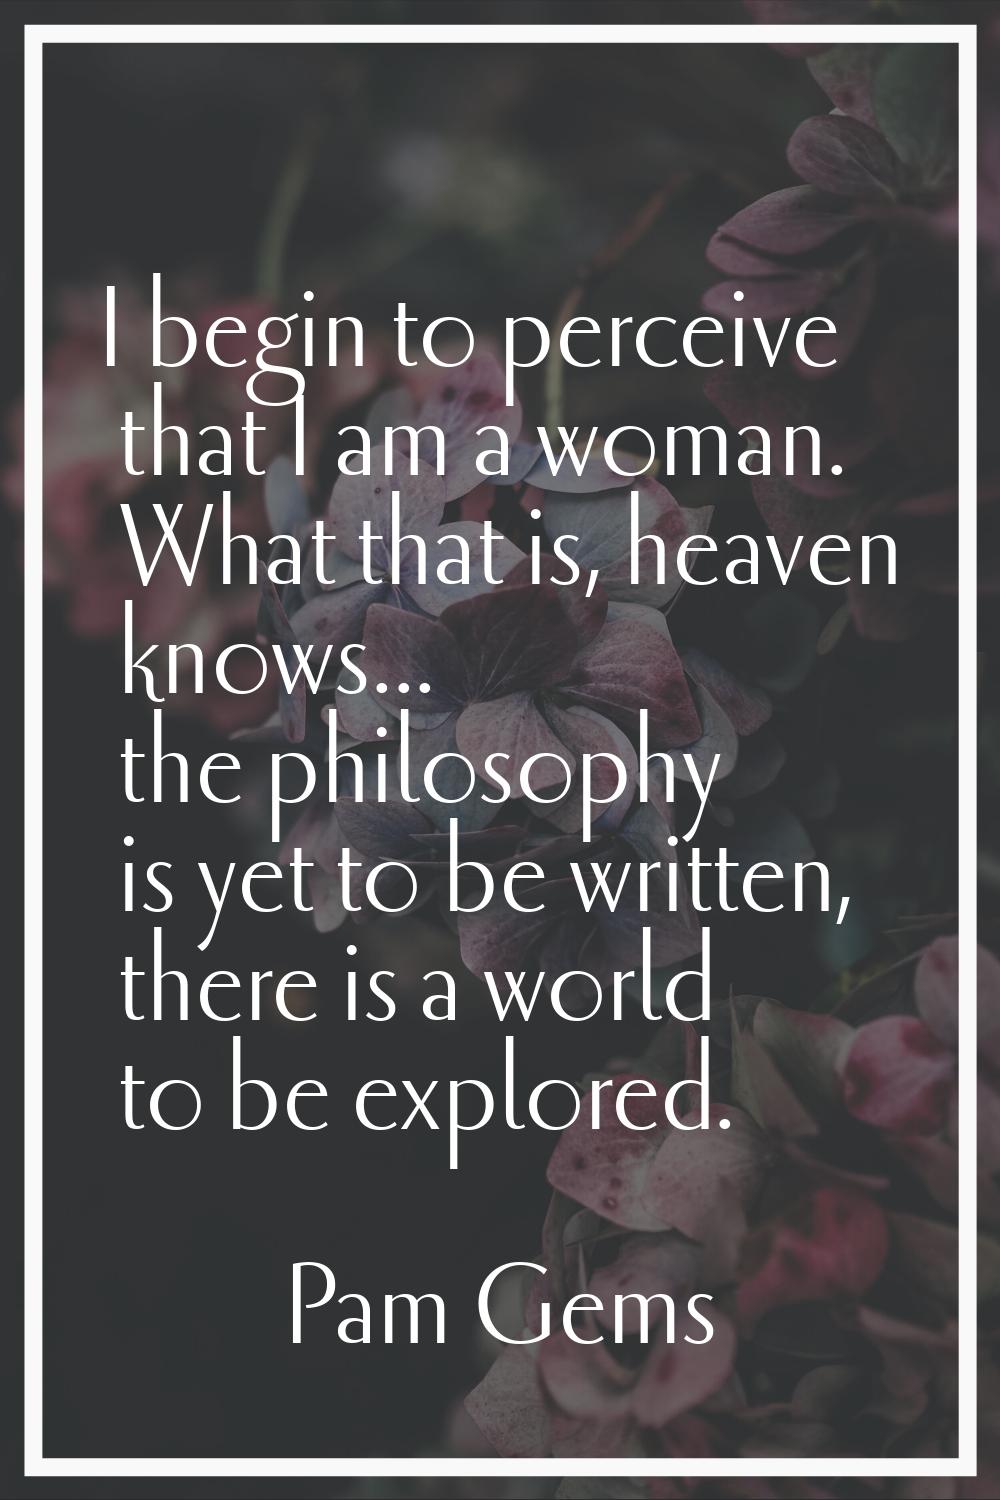 I begin to perceive that I am a woman. What that is, heaven knows... the philosophy is yet to be wr